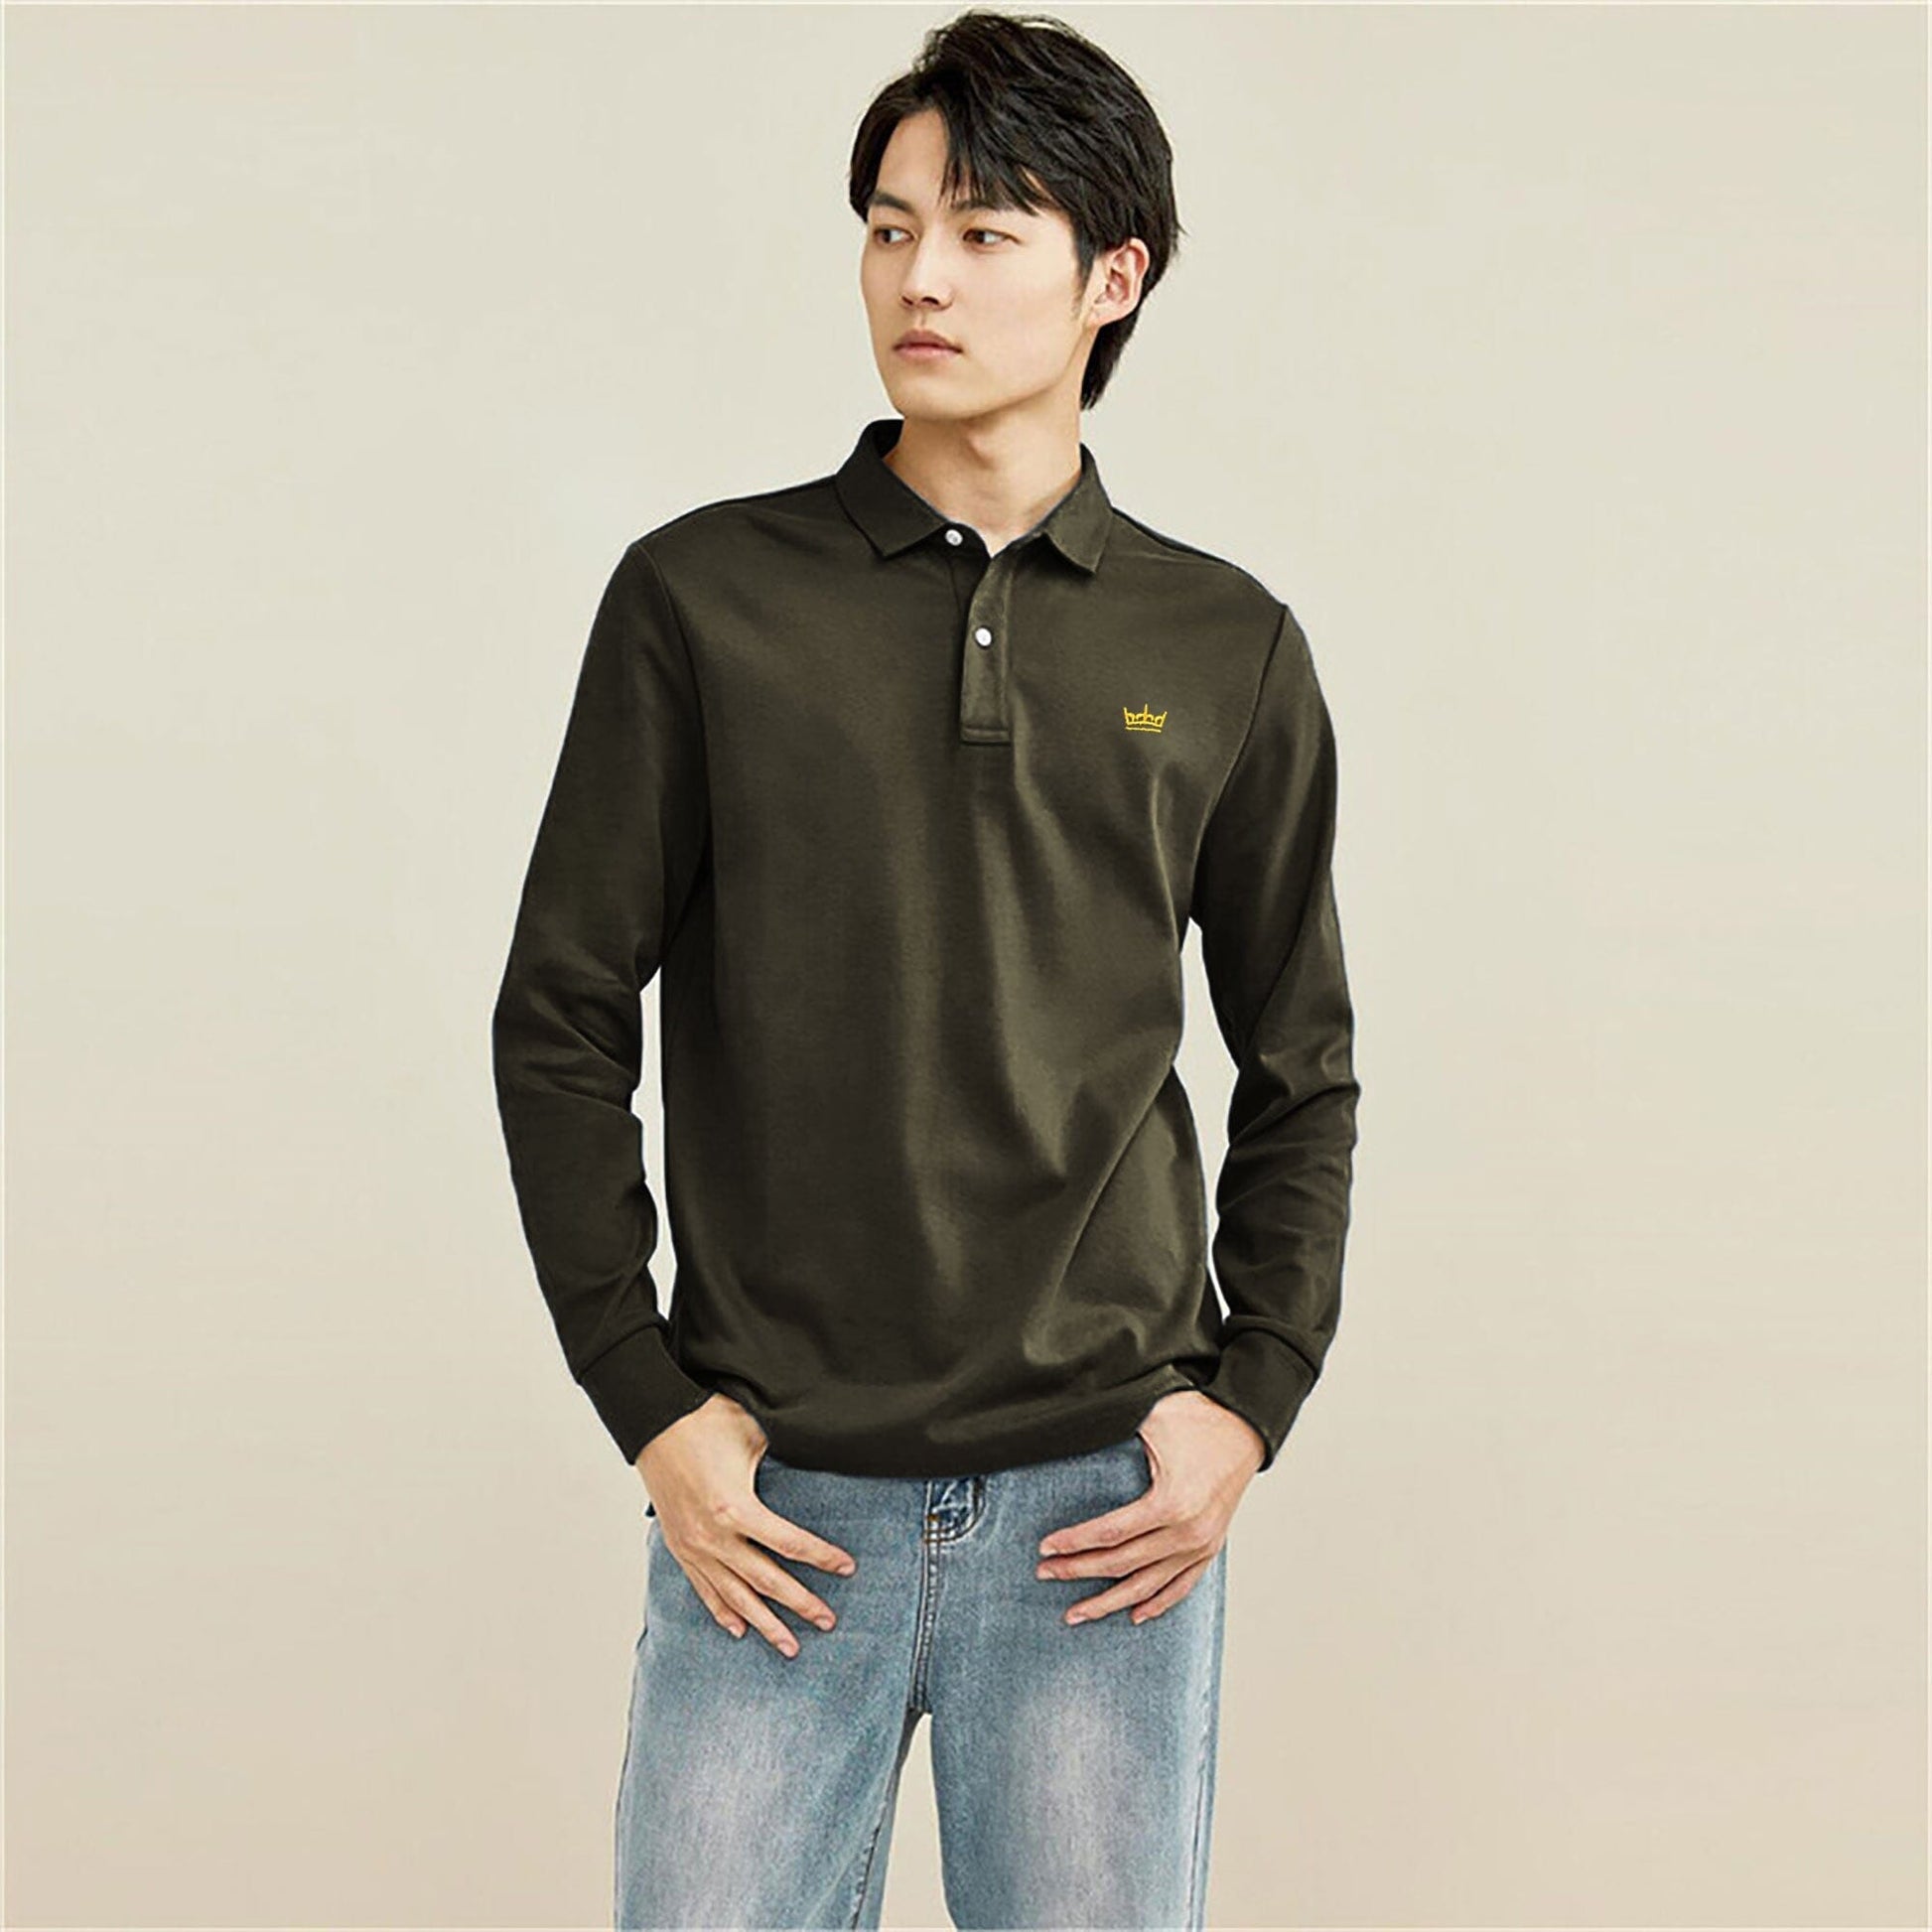 Industrialize Men's Crown Embroidered Minor Fault Long Sleeve Polo Shirt Men's Polo Shirt IST Olive 2XS 